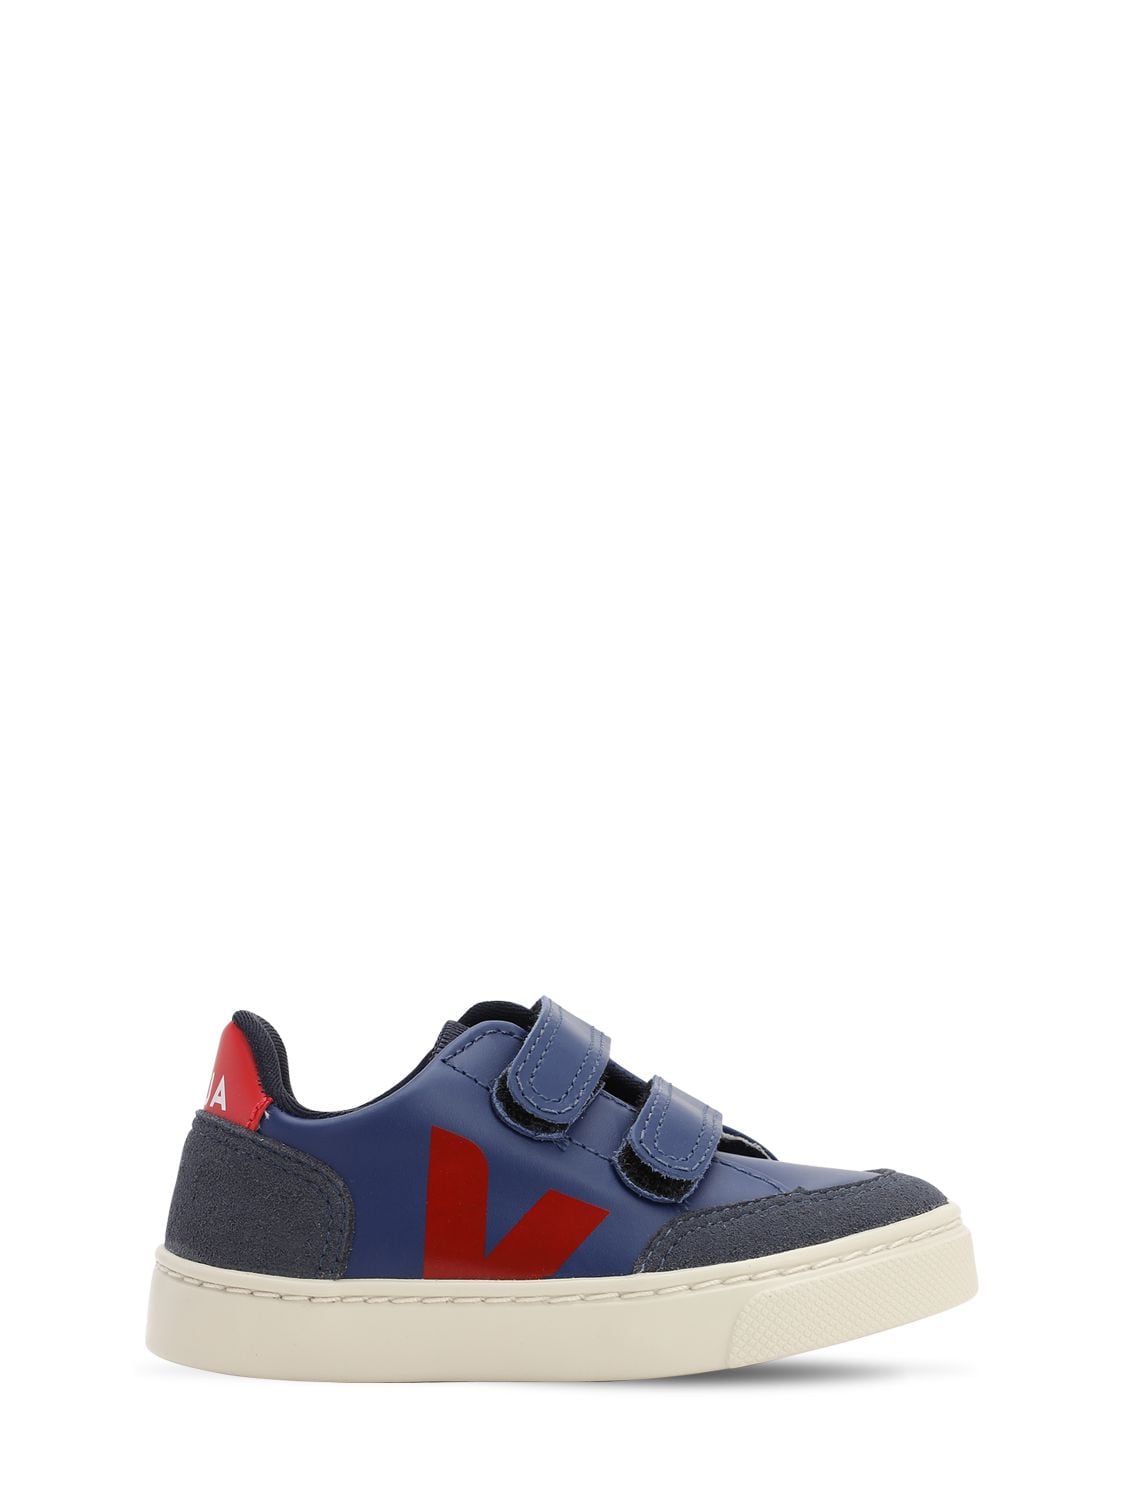 Veja Kids' Leather & Suede Strap Sneakers In Blue